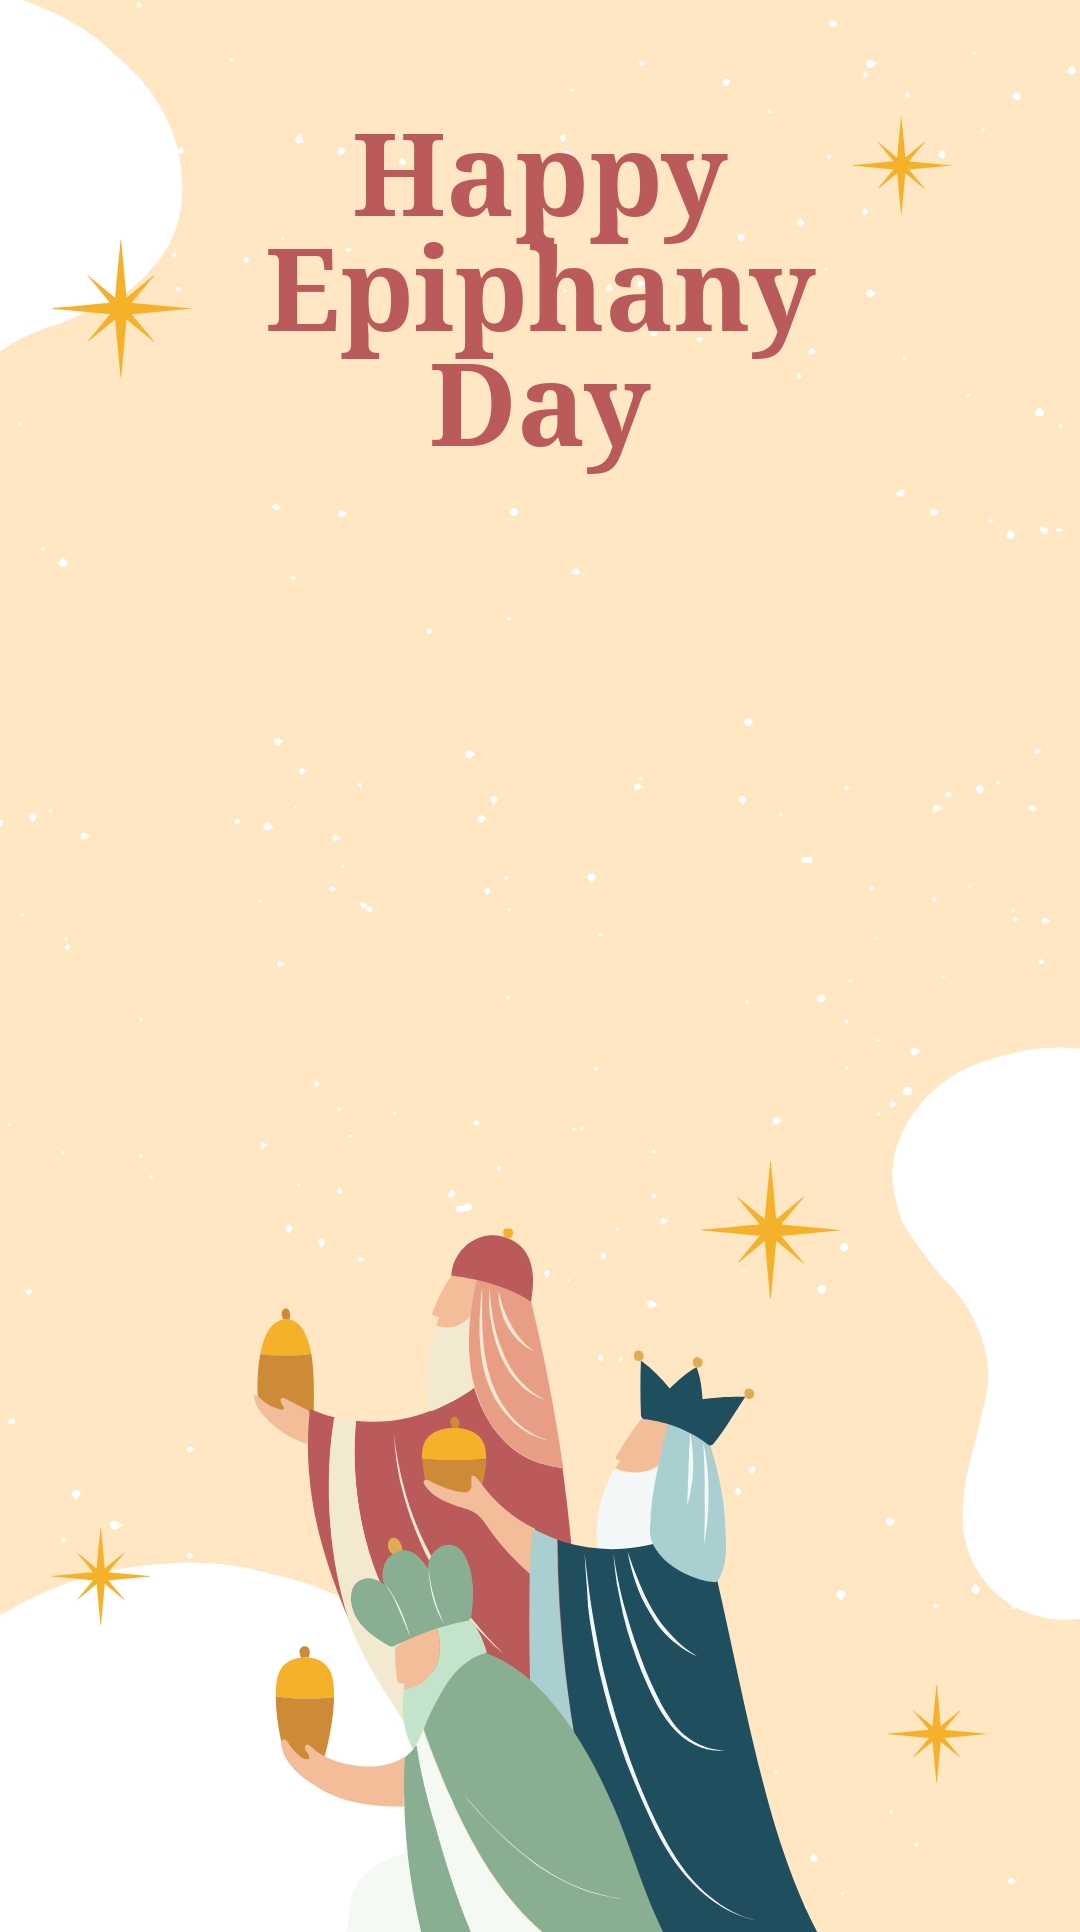 Free Happy Epiphany Day Snapchat Geofilter Template